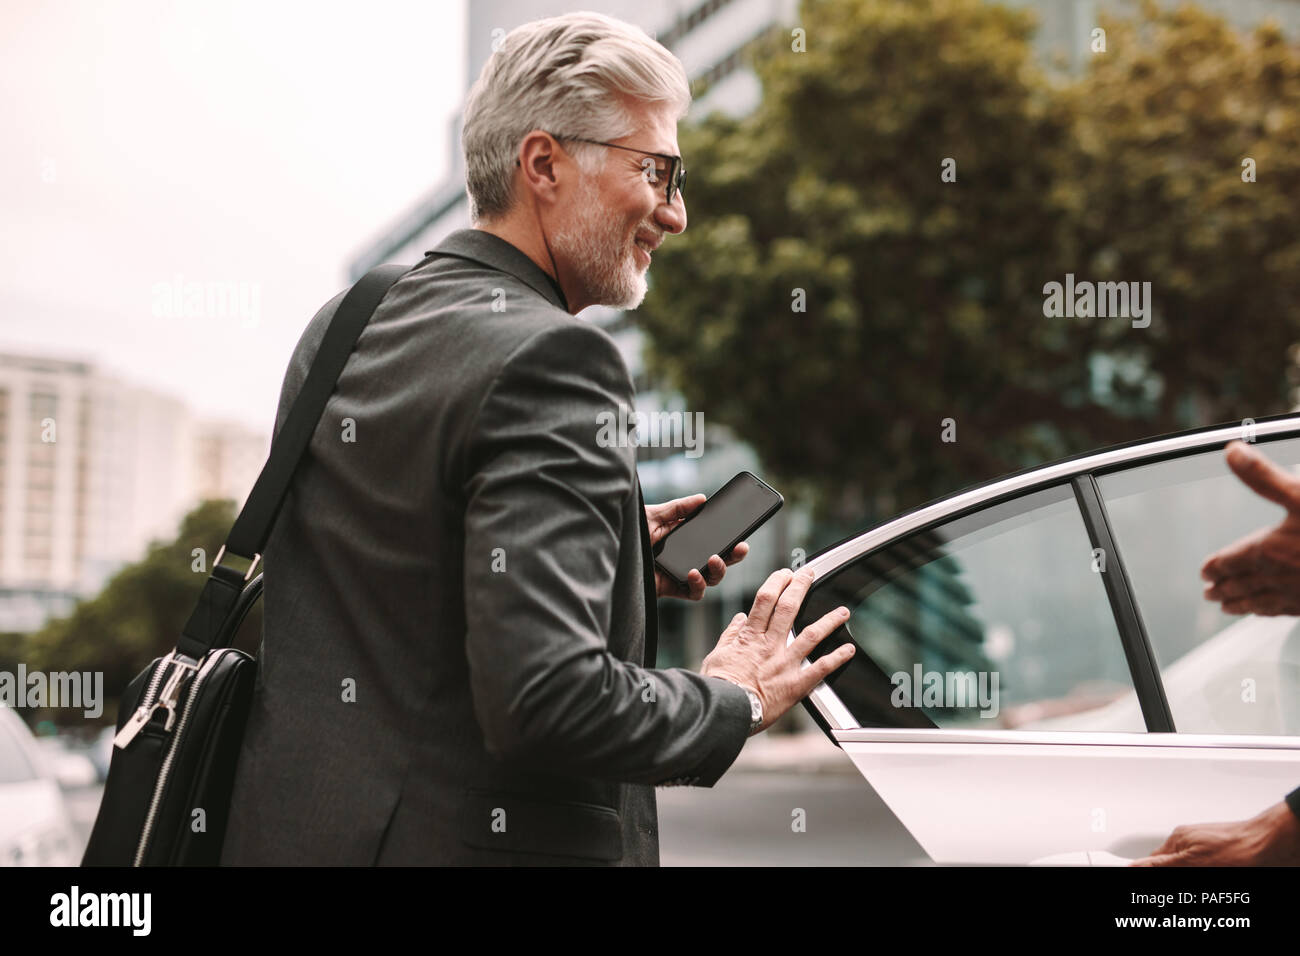 Happy mature commuter getting into a taxi. Businessman entering a taxi with driver opening door. Stock Photo